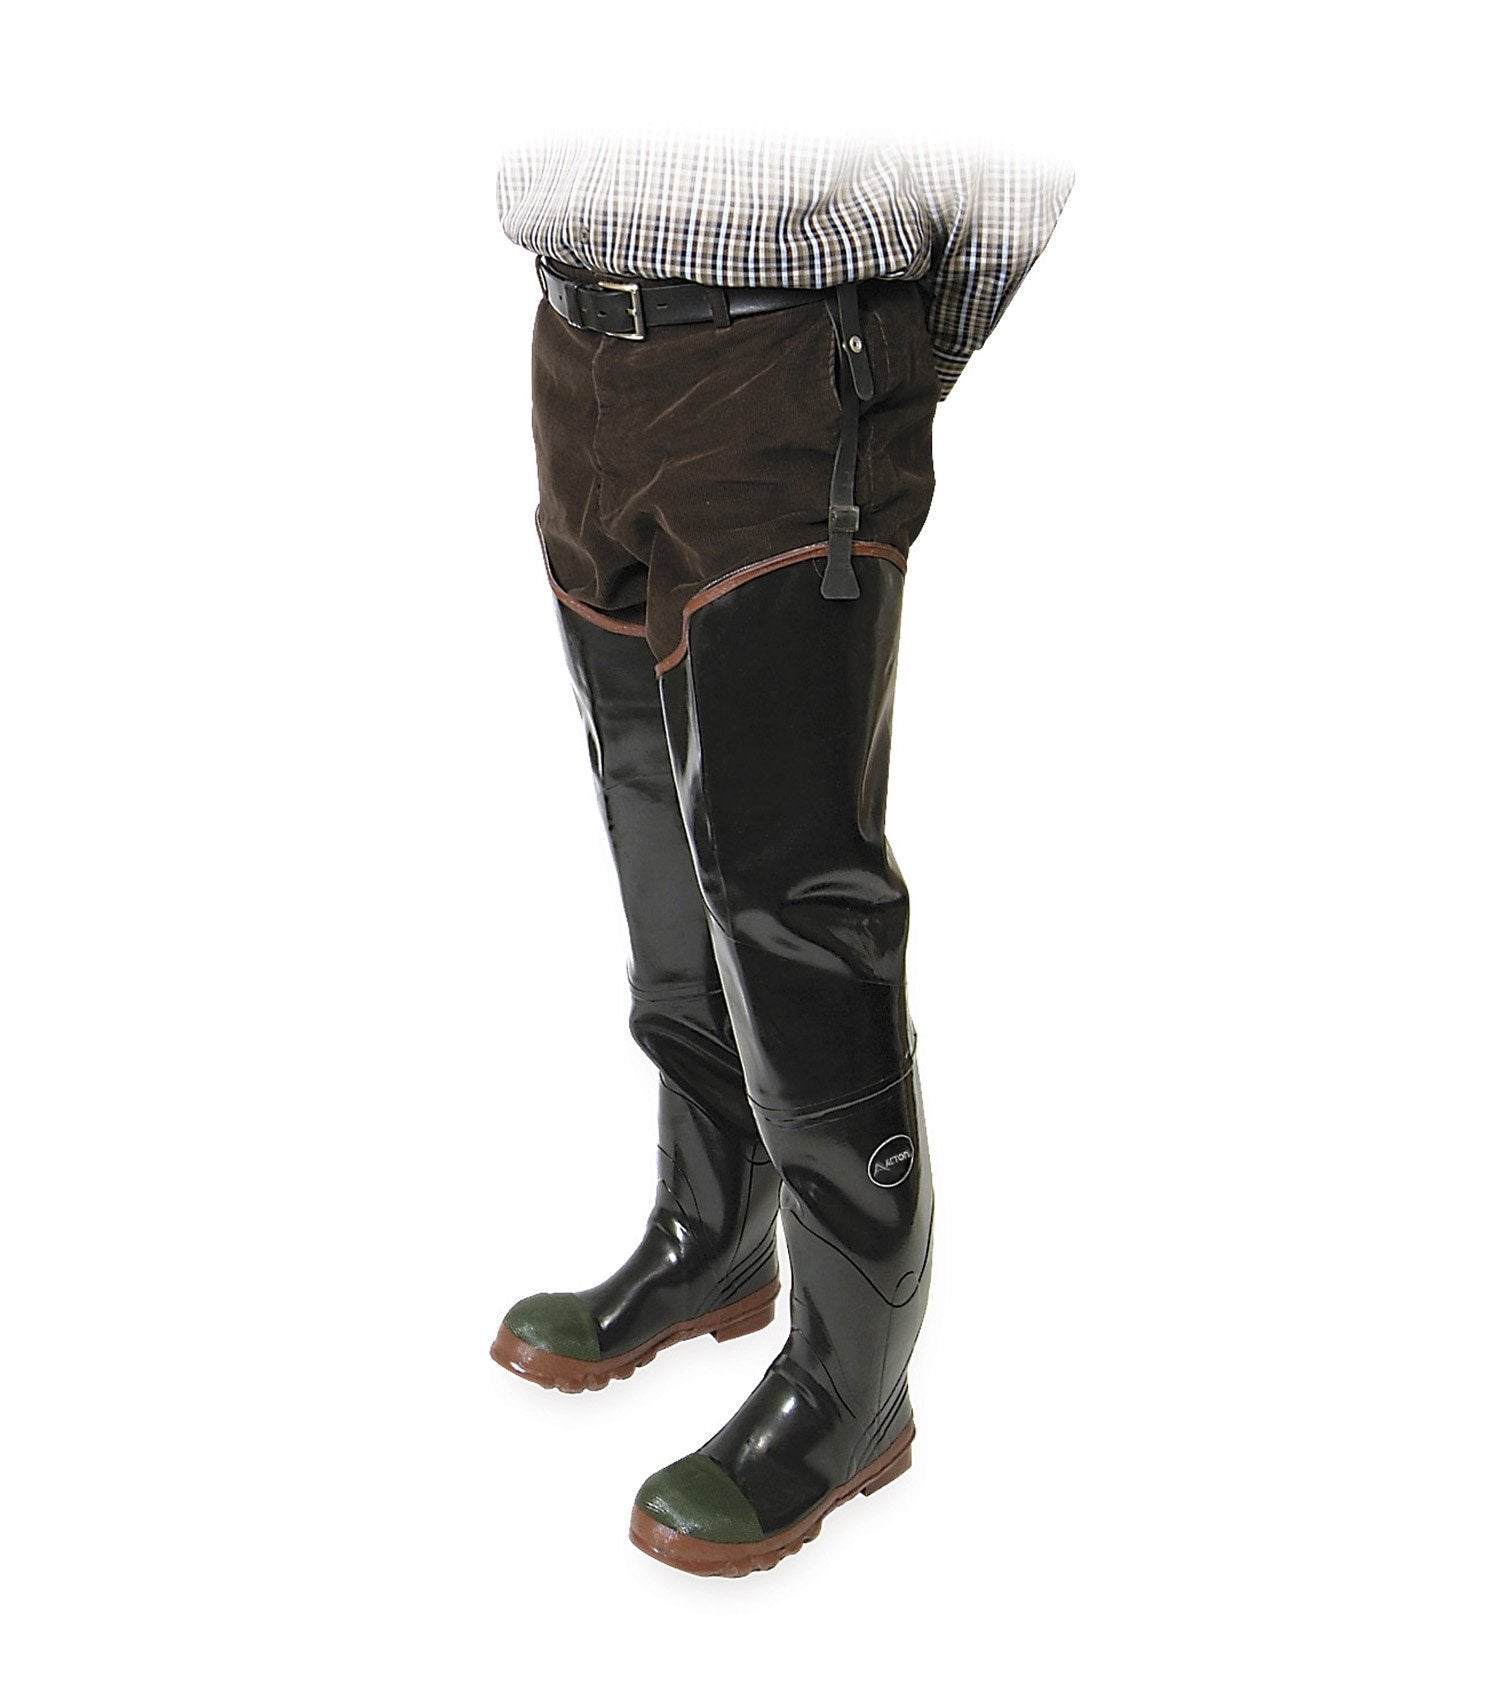 Acton Protecto Industrial Rubber Safety Hip Waders | Sizes 7-13 Work Boots - Cleanflow